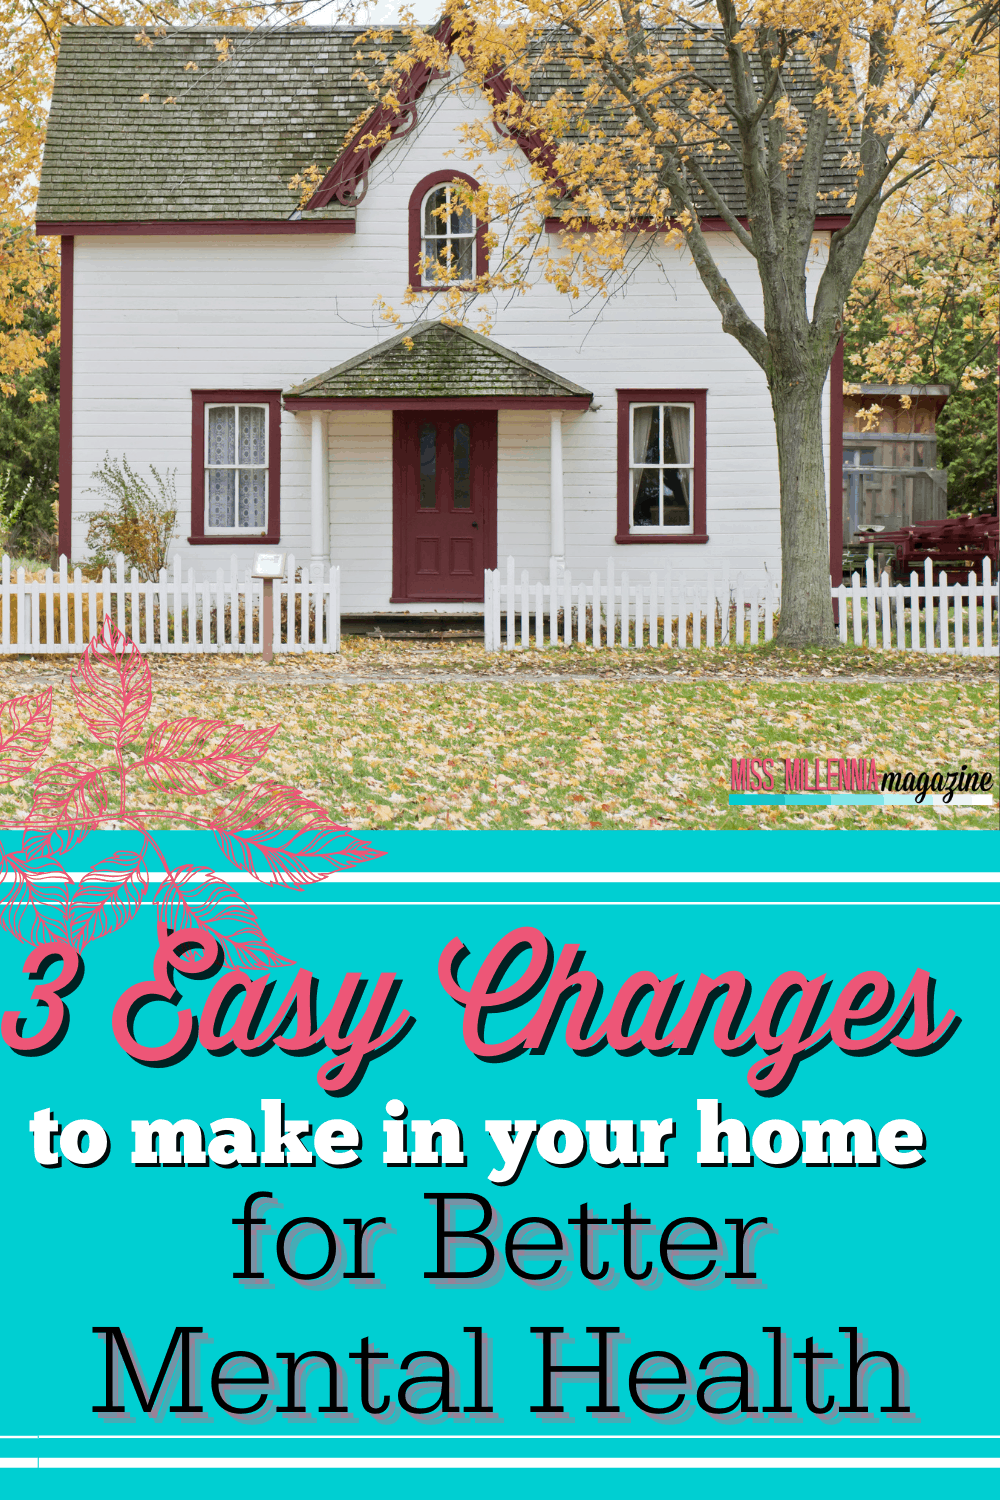 3 Easy Changes To Make In Your Home For Better Mental Health